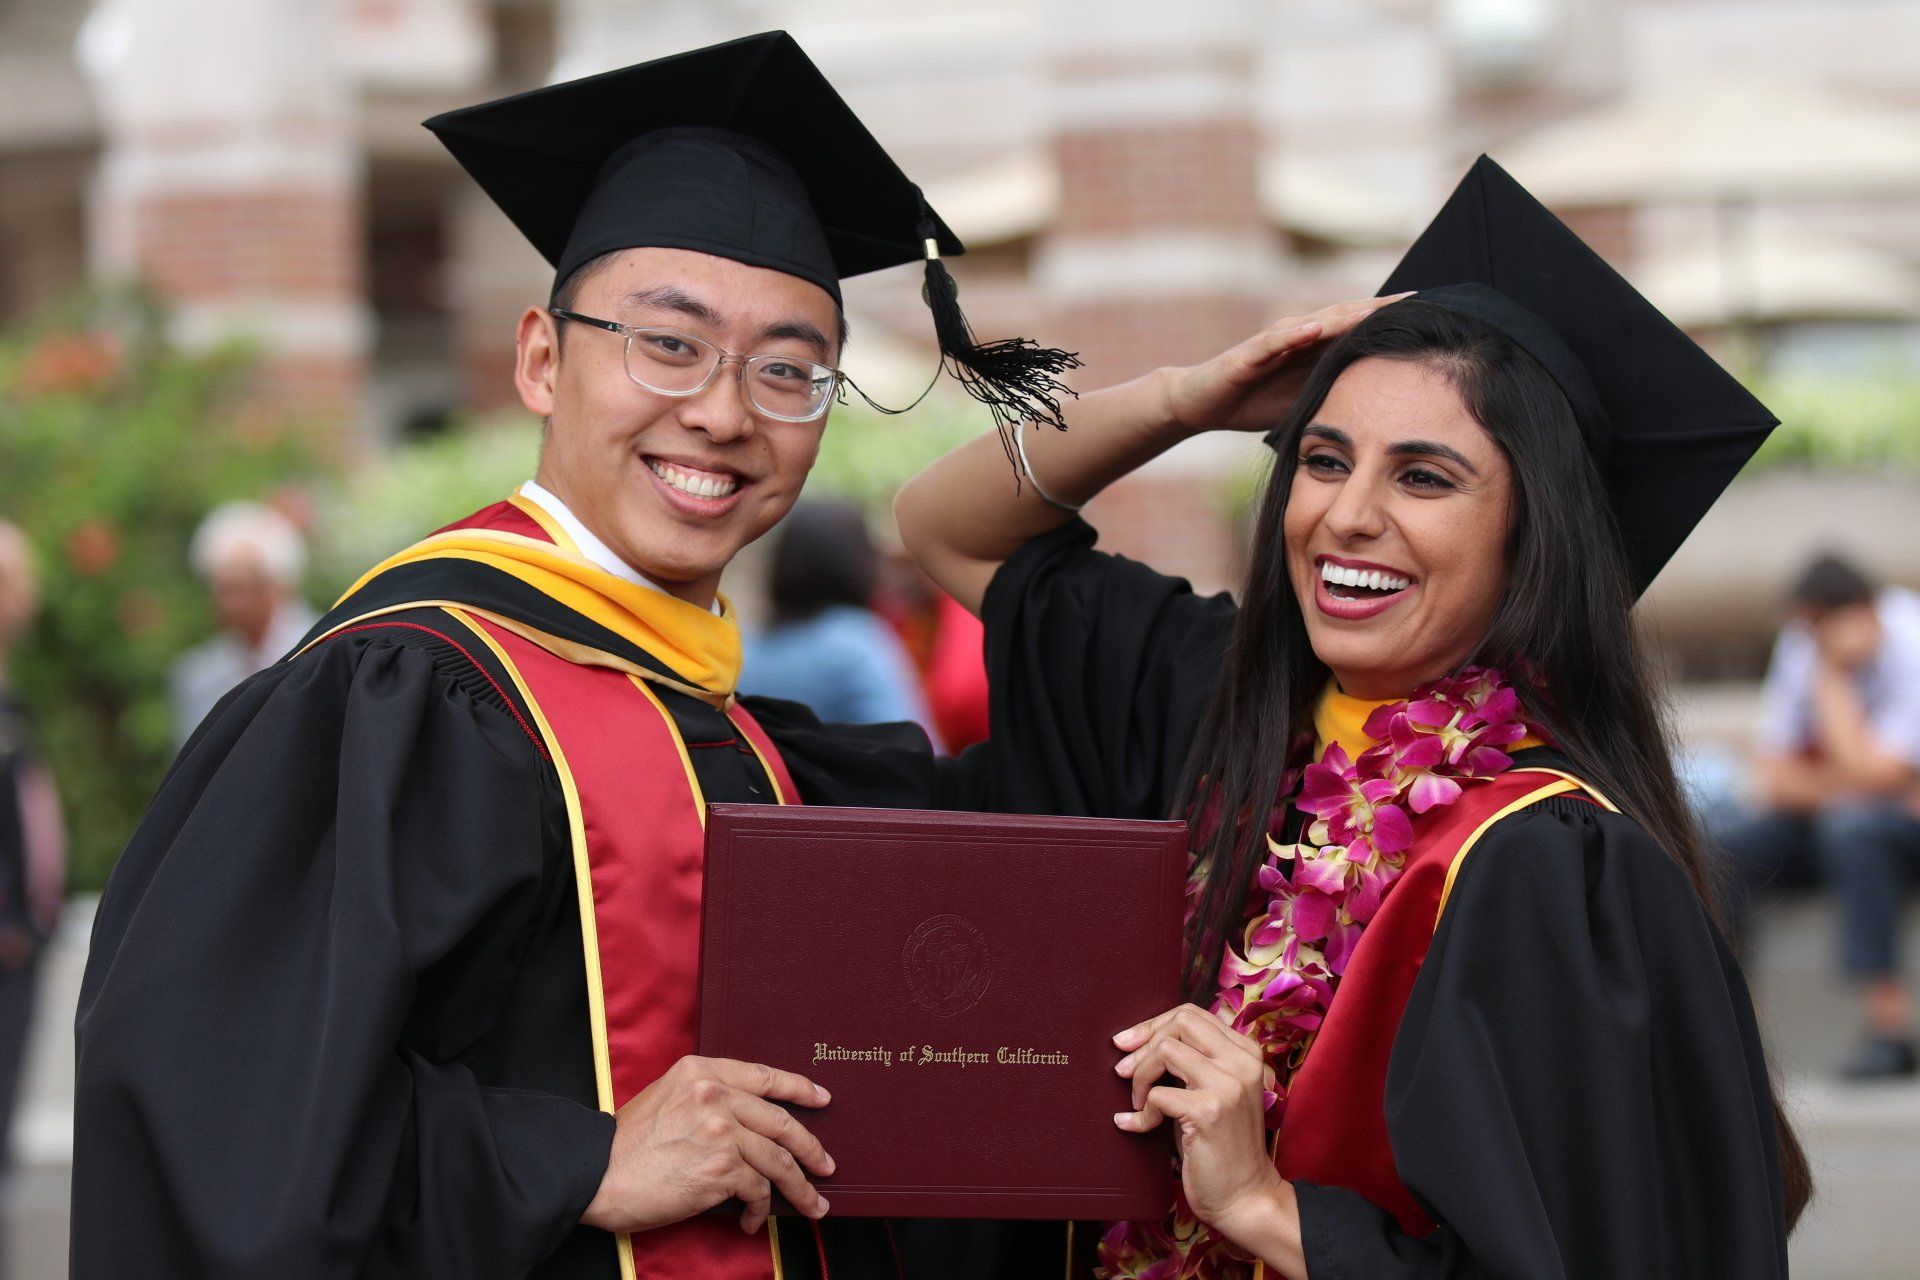 A man and a woman are posing for a picture at a graduation ceremony.